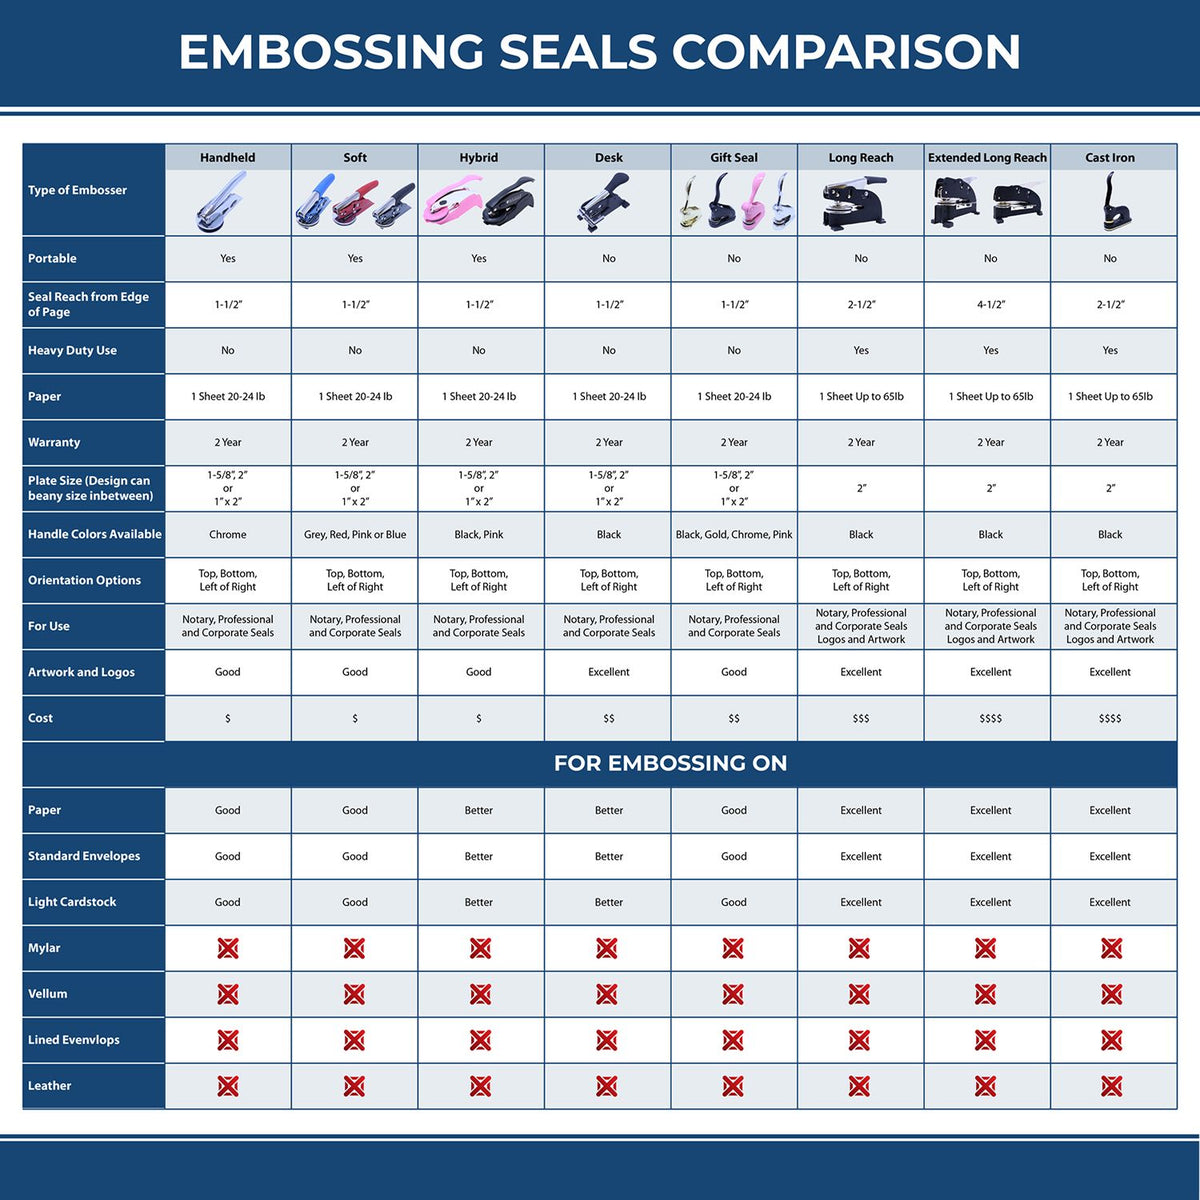 A comparison chart for the different types of mount models available for the Hybrid Illinois Architect Seal